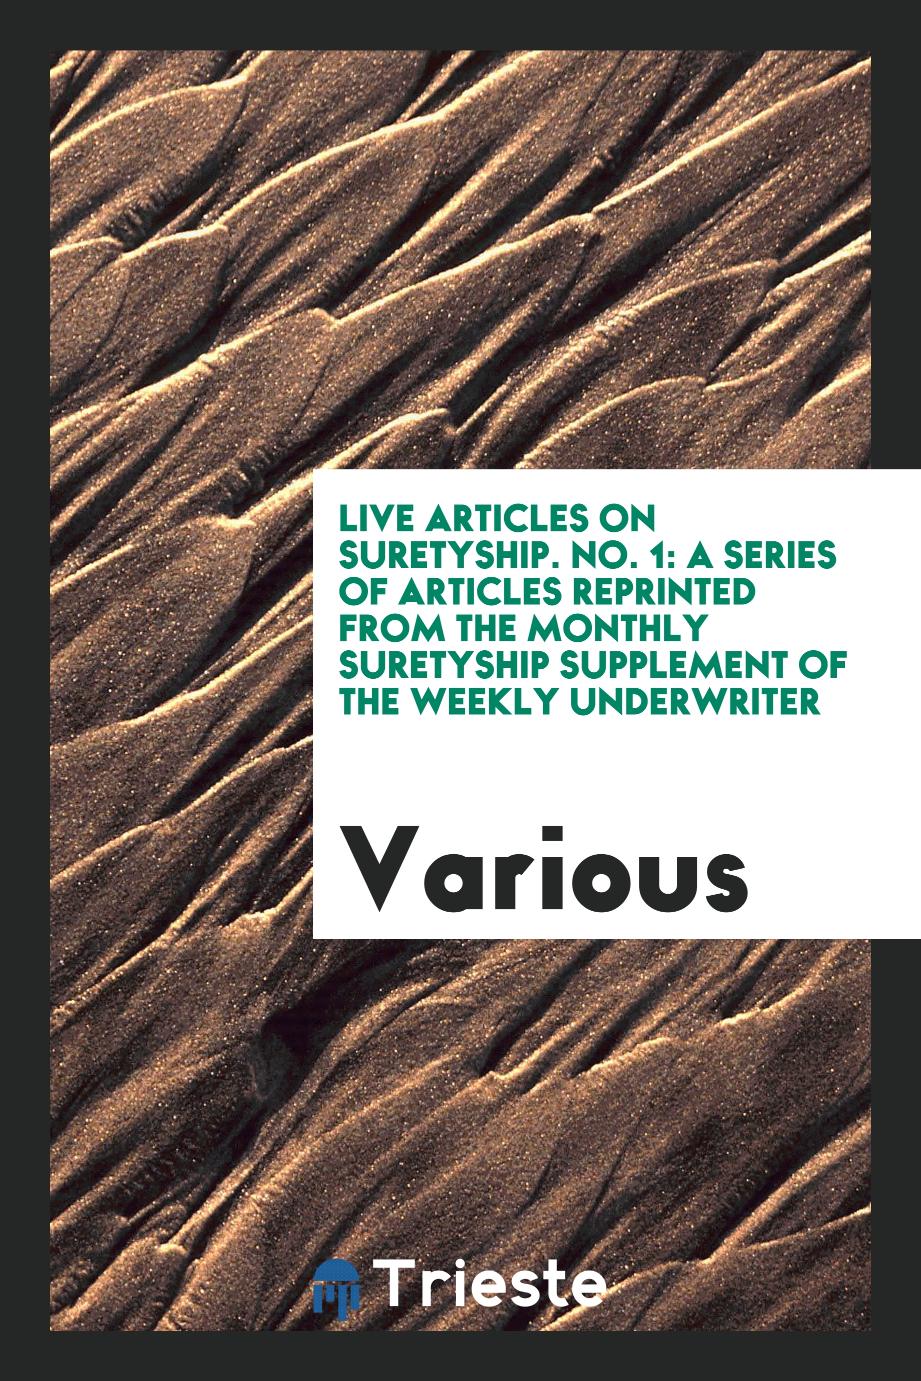 Live Articles on Suretyship. No. 1: A Series of Articles Reprinted from the Monthly Suretyship Supplement of the Weekly Underwriter